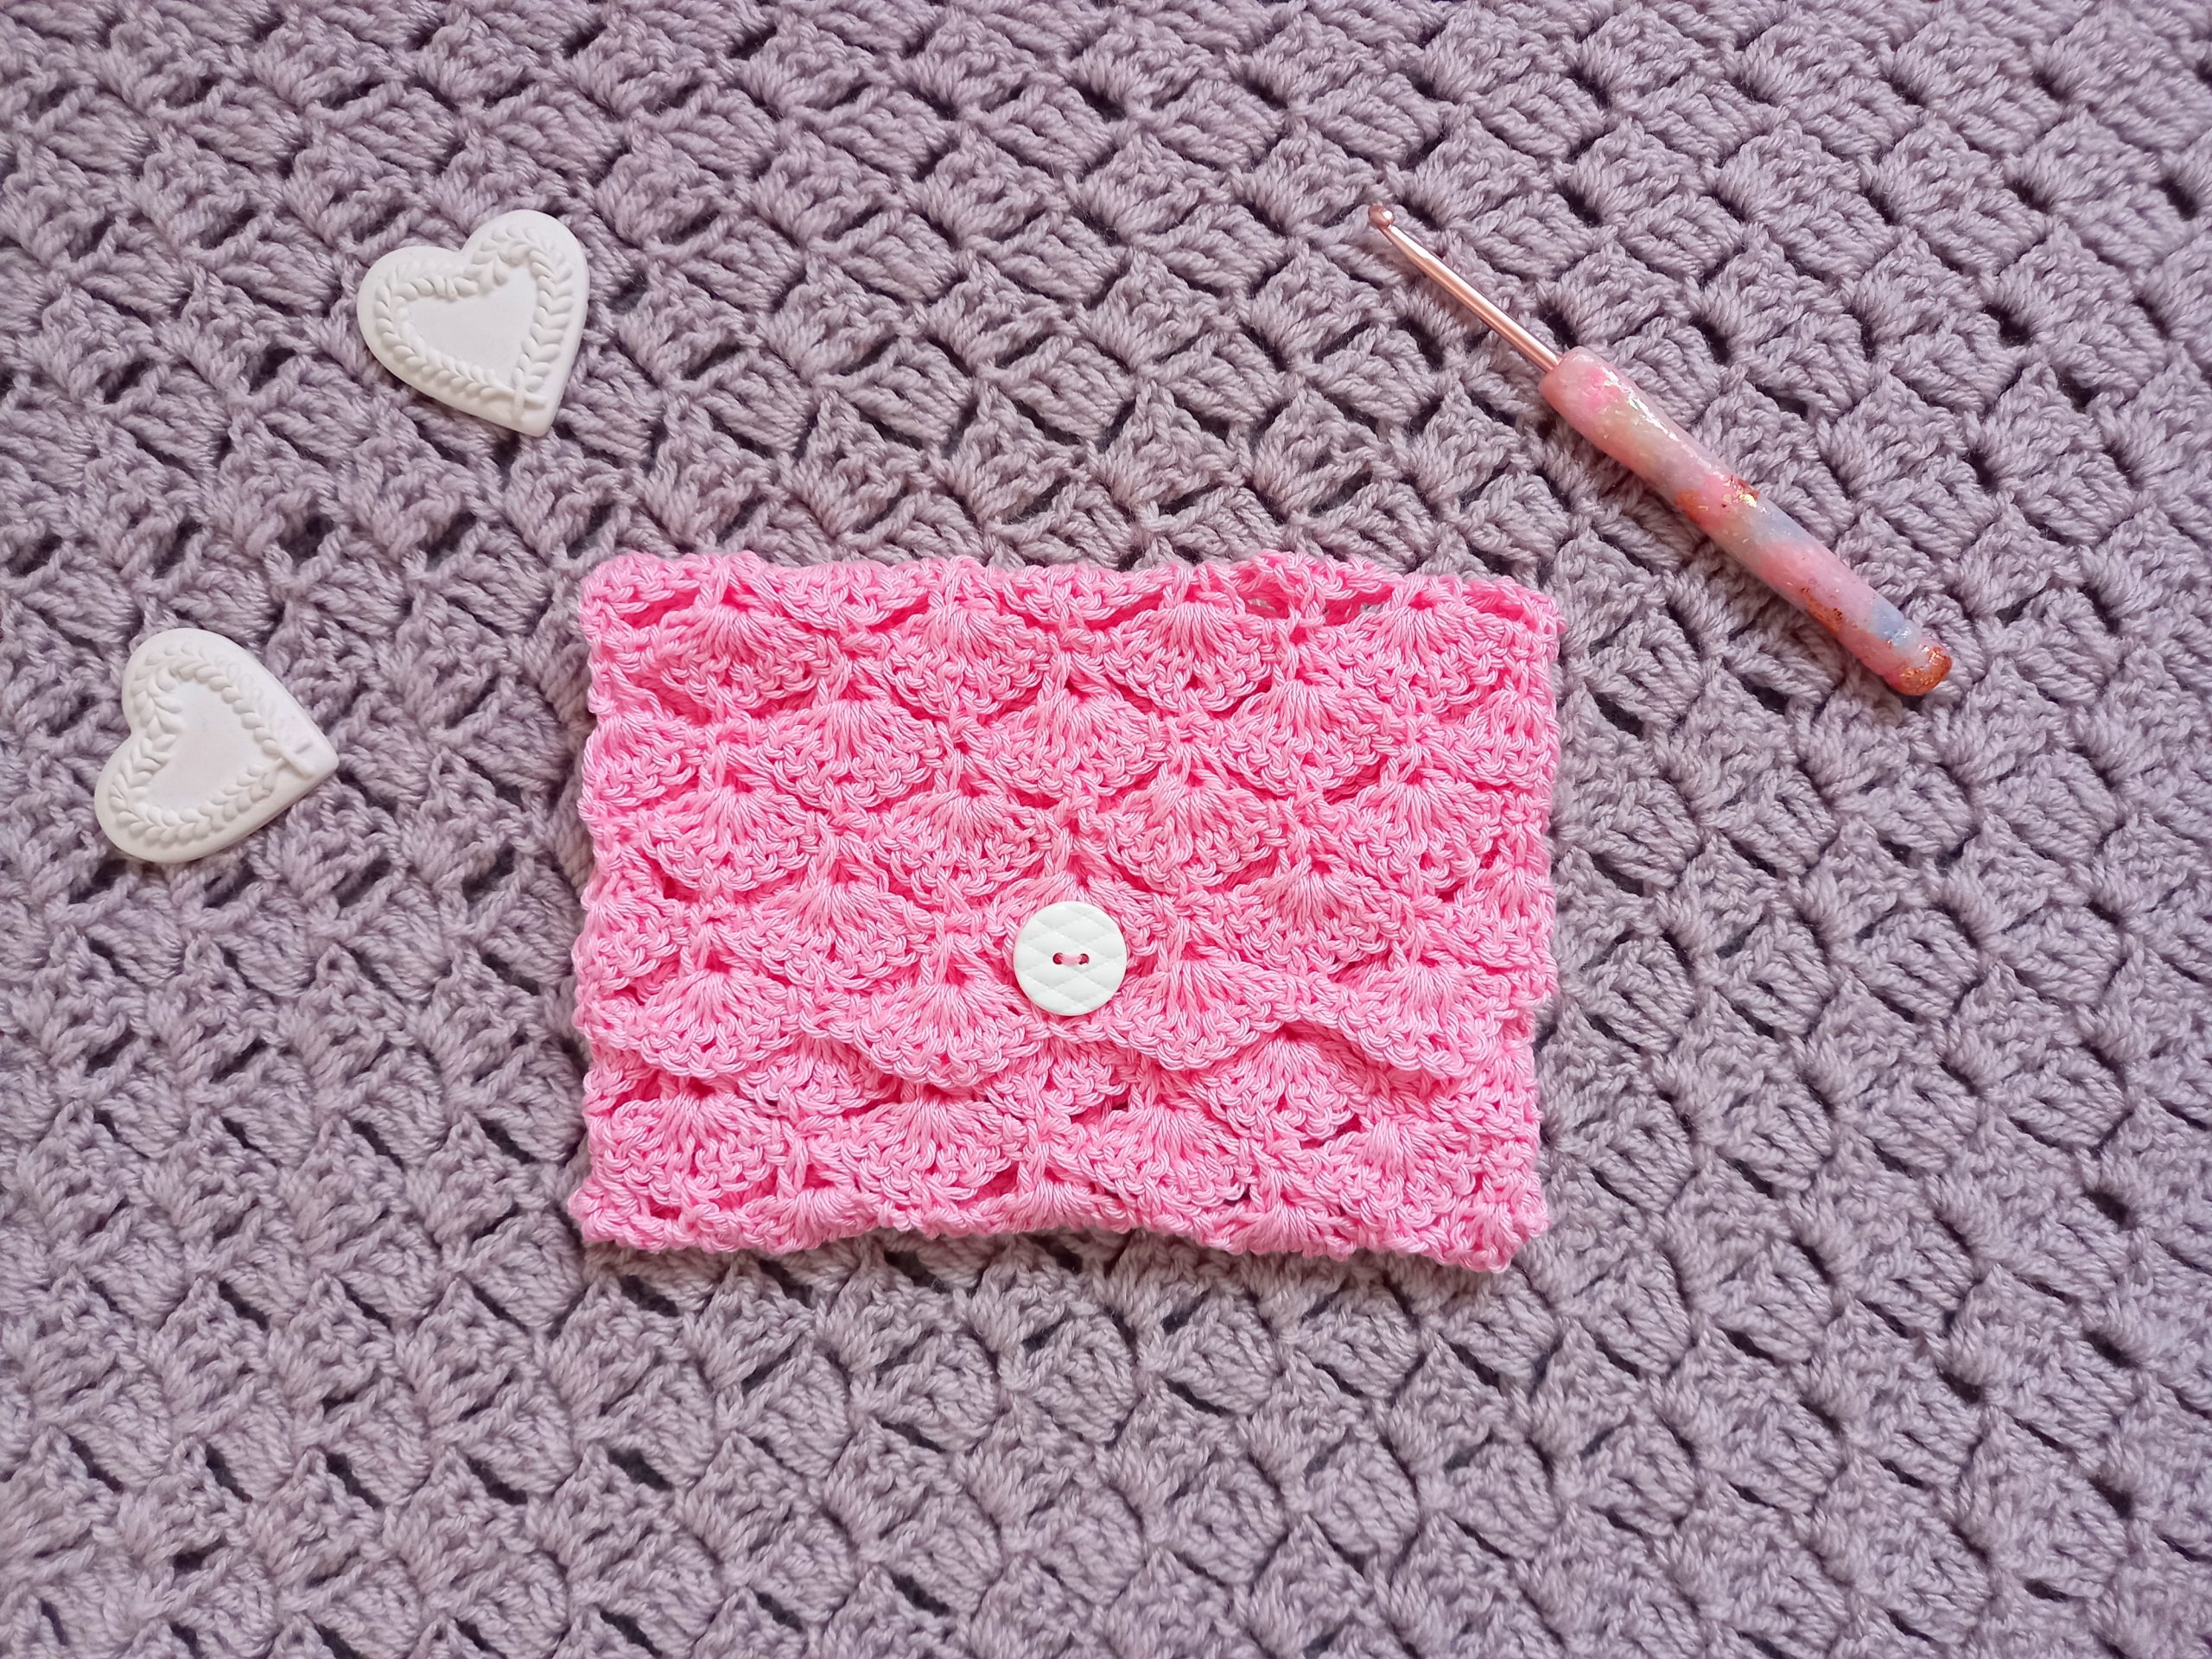 Simple clutch with 8 flap designs - great for beginners